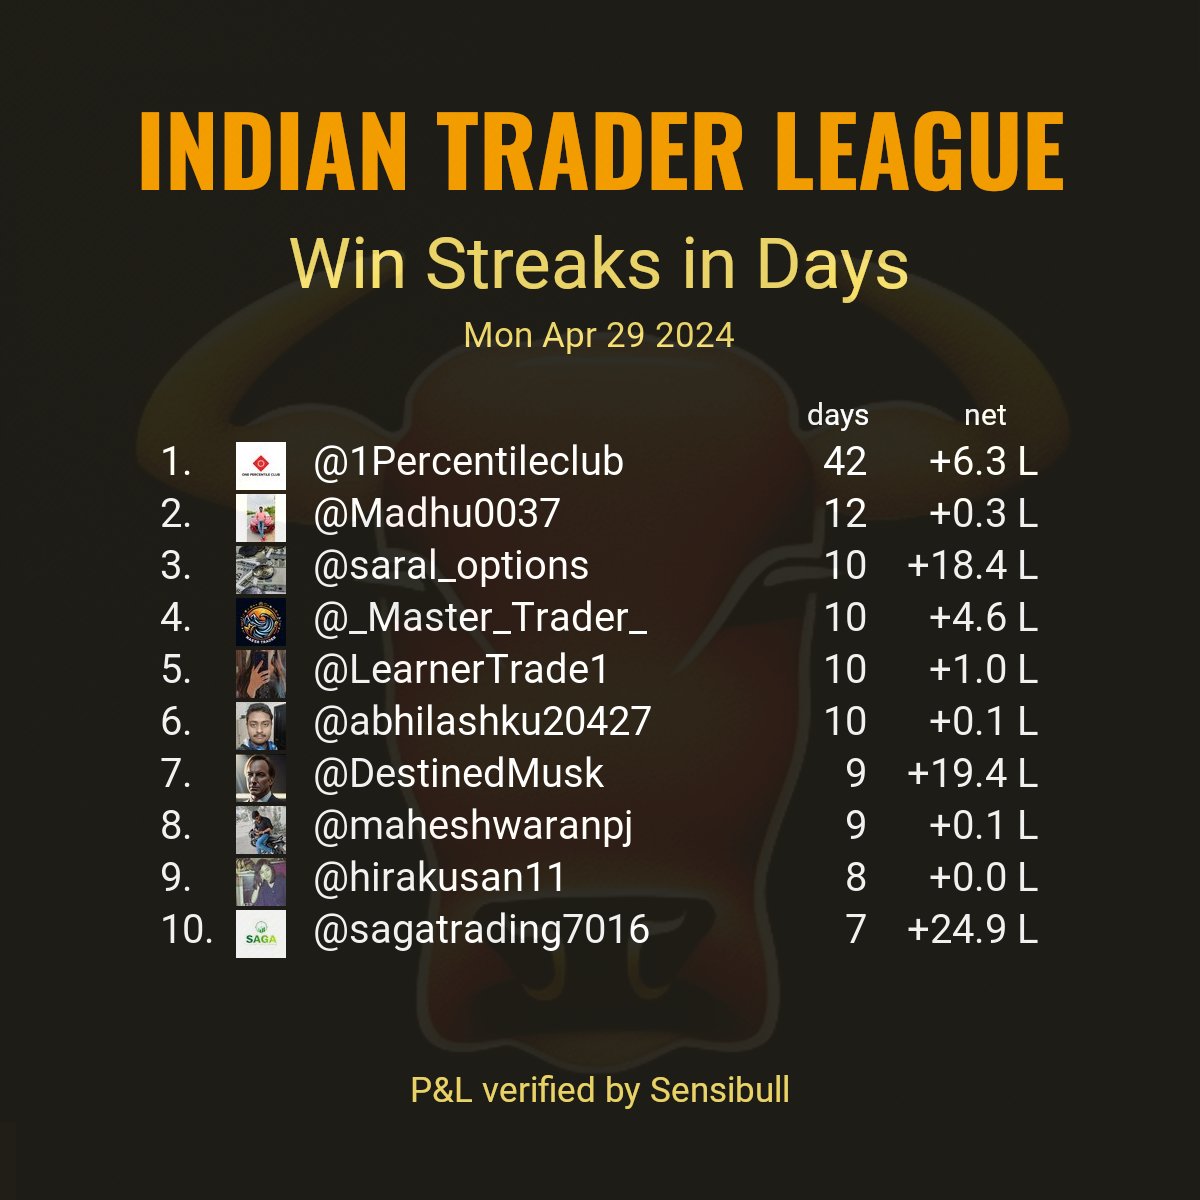 Top 10 longest win streaks reported by stock market participants as of trade date Mon Apr 29 2024. Criteria: Continuous days of #VerifiedBySensibull P&L with profit (>0.0). Sorted by number of days. Only realized P&L is considered.